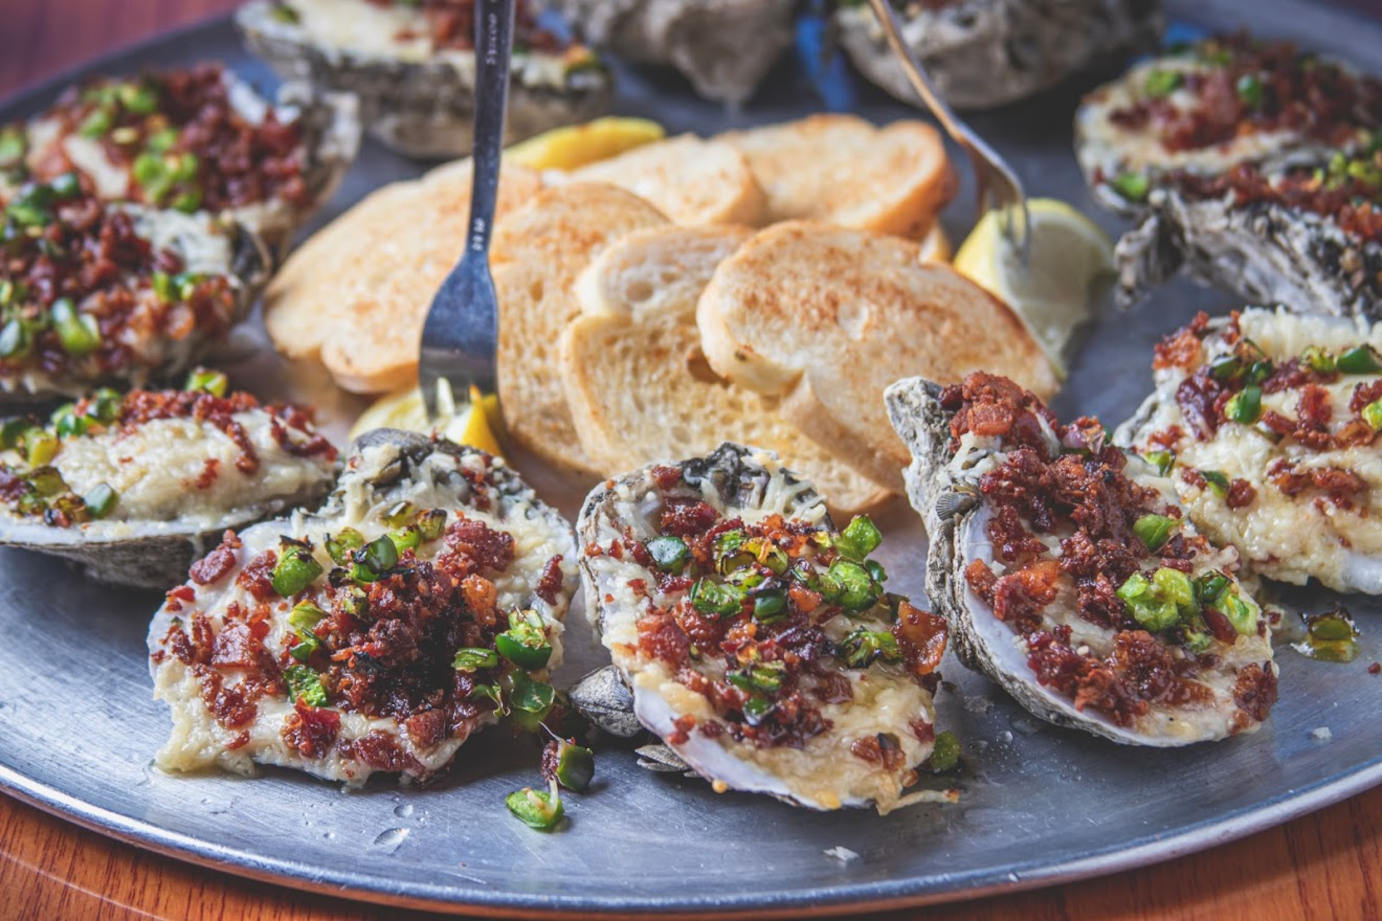 Oysters on the Half Shell topped with parmesan cheese, bacon, and jalapenos